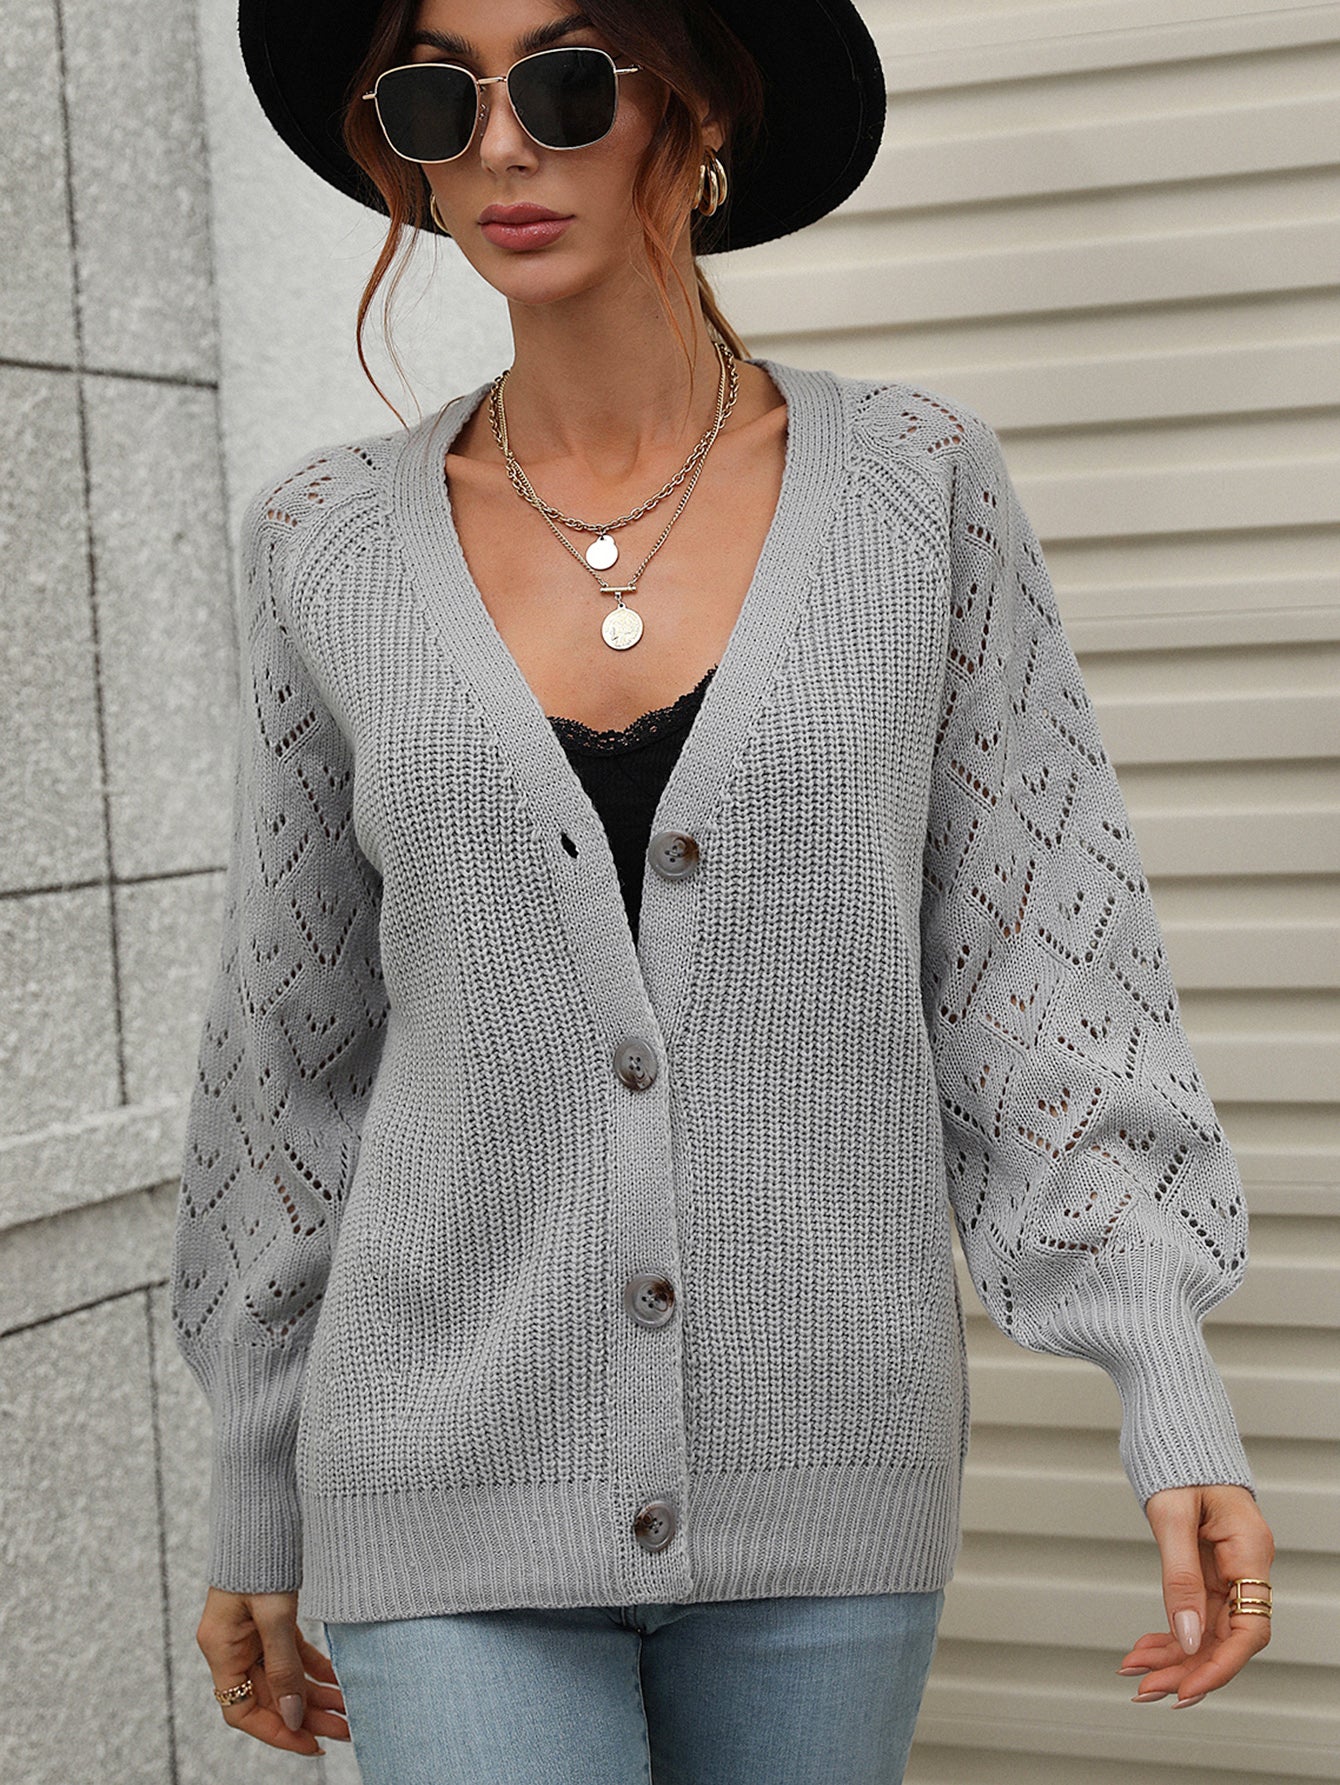 Women's Solid-Color Knit Cardigan Loose Sweater